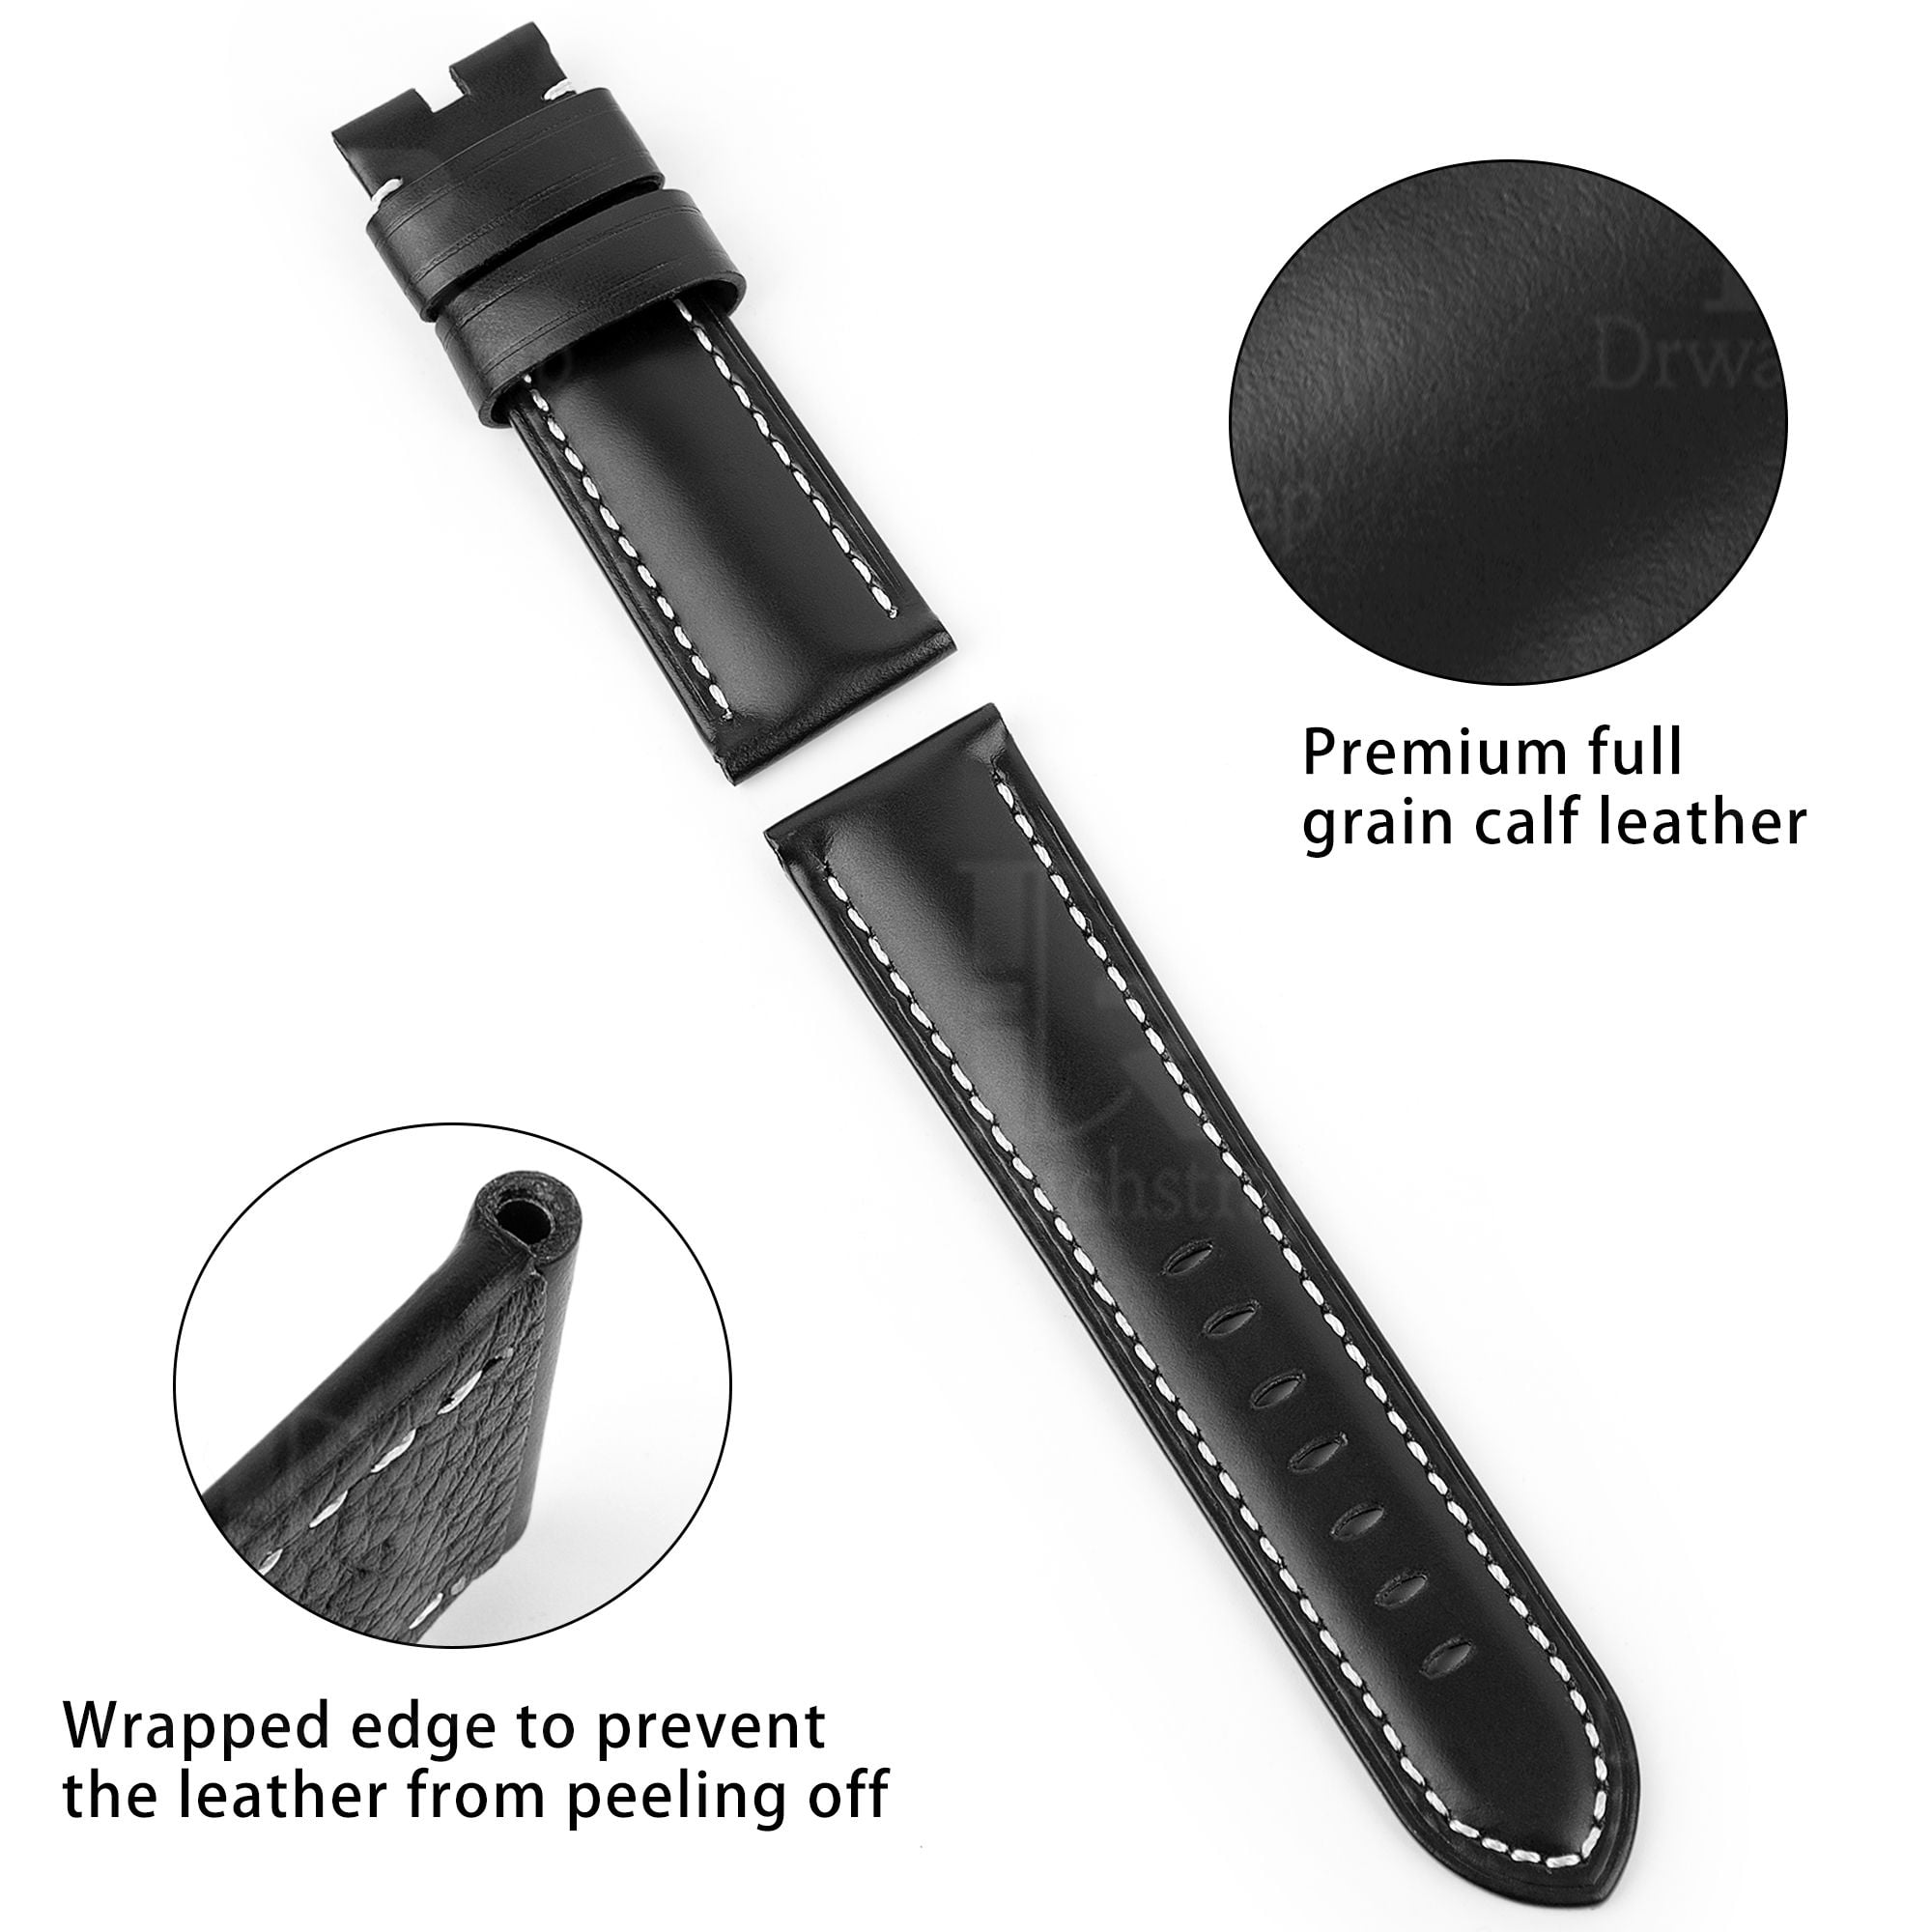 Premium aftermarket best OEM handmade Black Panerai calfskin leather Strap and watch band replacement 22mm 24mm for Panerai Luminor Due luxury watches from dr watchstrap for sale - Shop the premium calf leather material wholesale straps and watchbands online at a low price